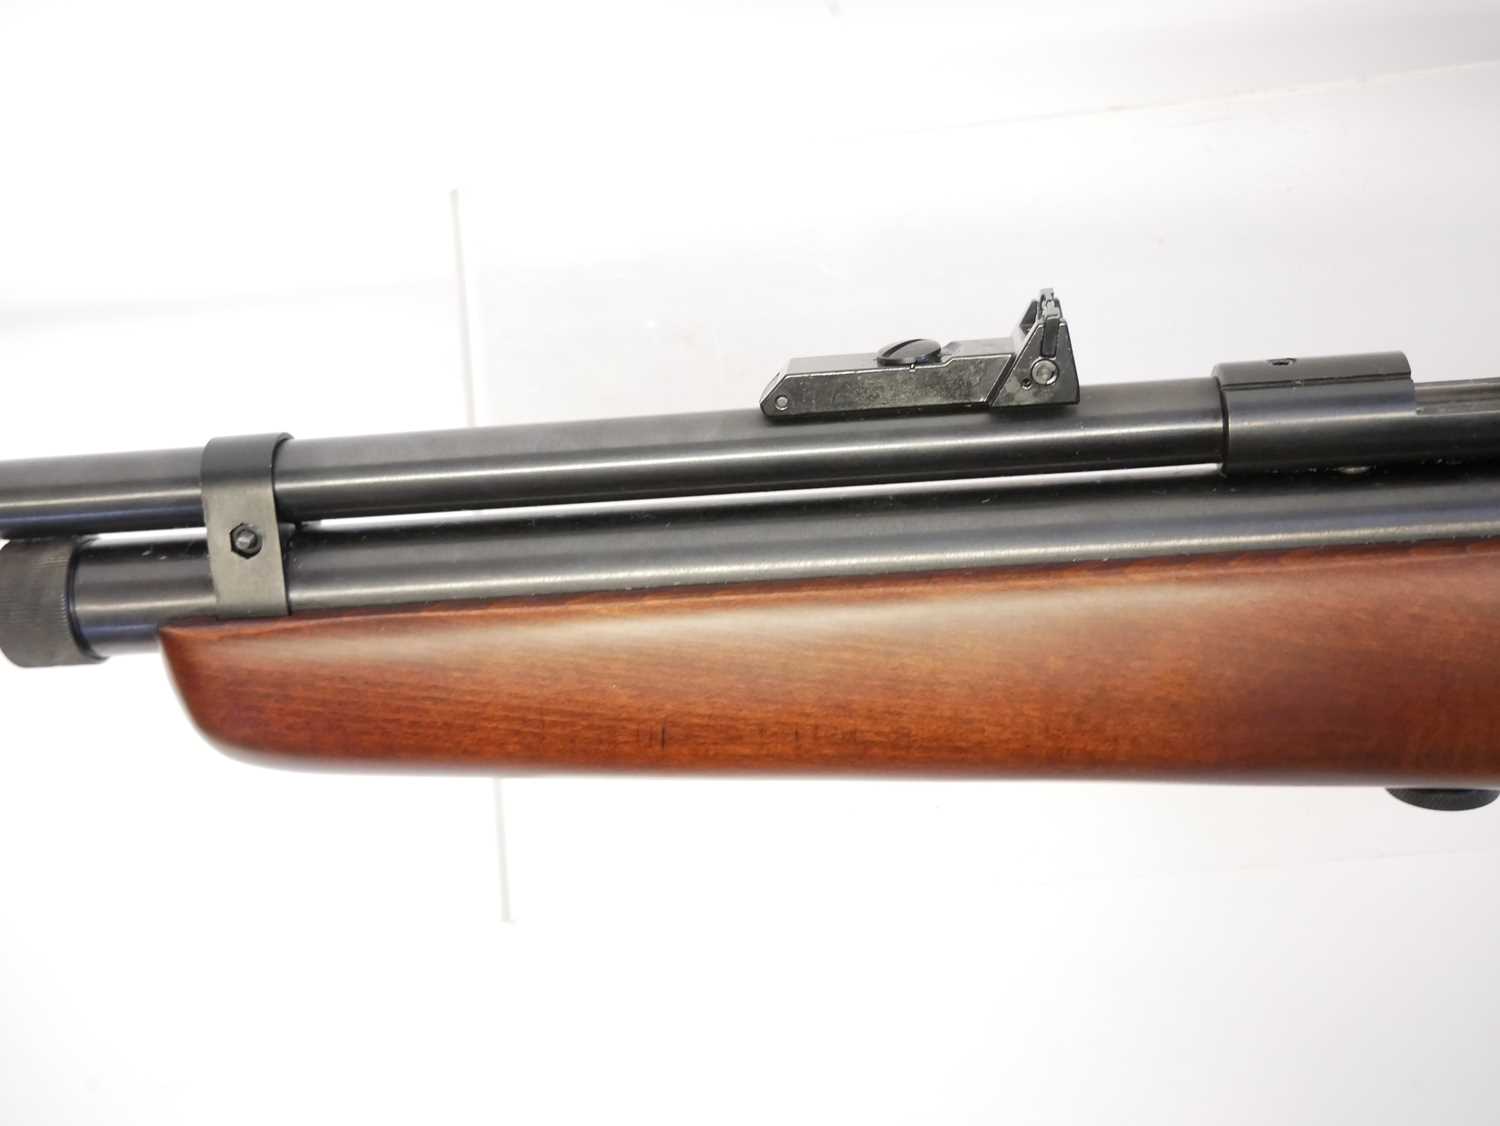 SMK QB78DL .22 CO2 air rifle, 29inch barrel including the fitted moderator, fitted with Hawke scope, - Image 10 of 12